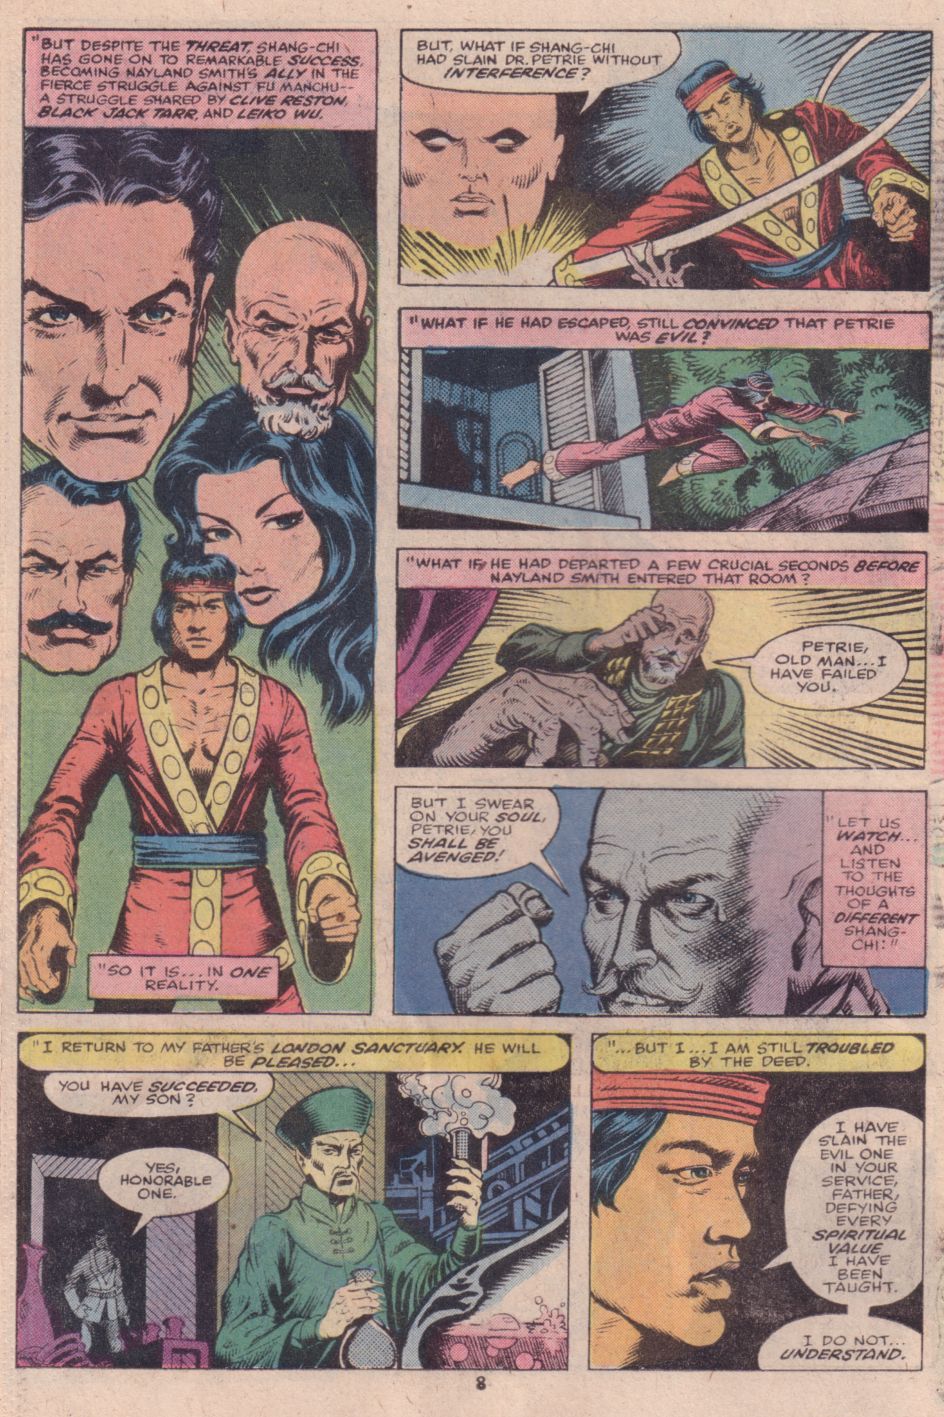 What If? (1977) issue 16 - Shang Chi Master of Kung Fu fought on The side of Fu Manchu - Page 7